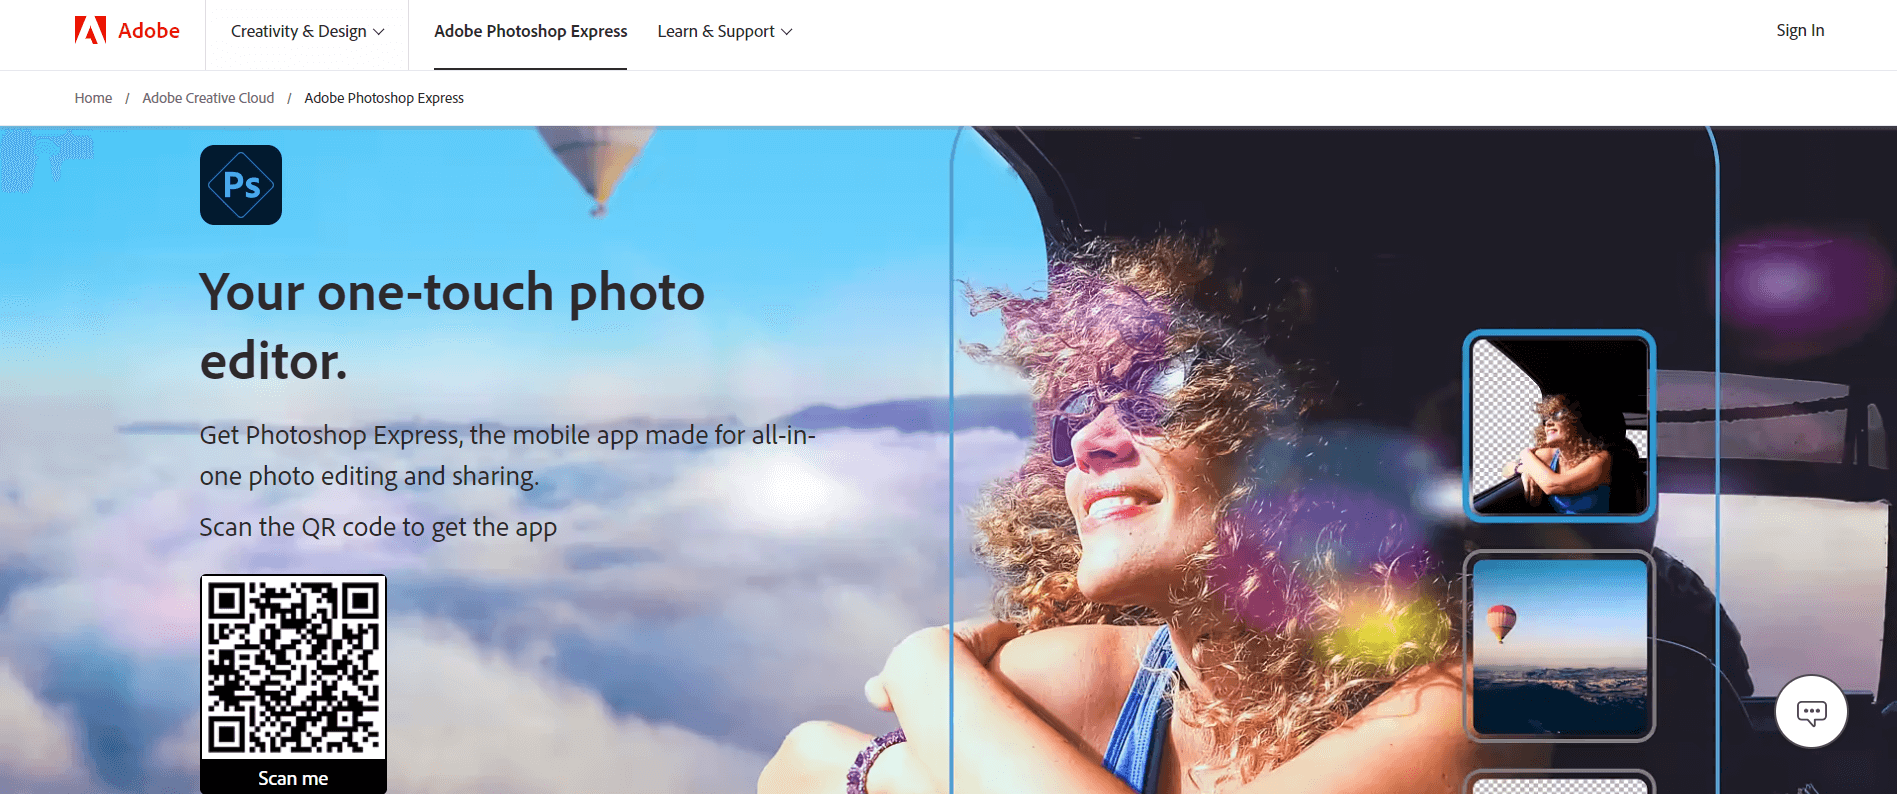 Adobe Photoshop Express product page